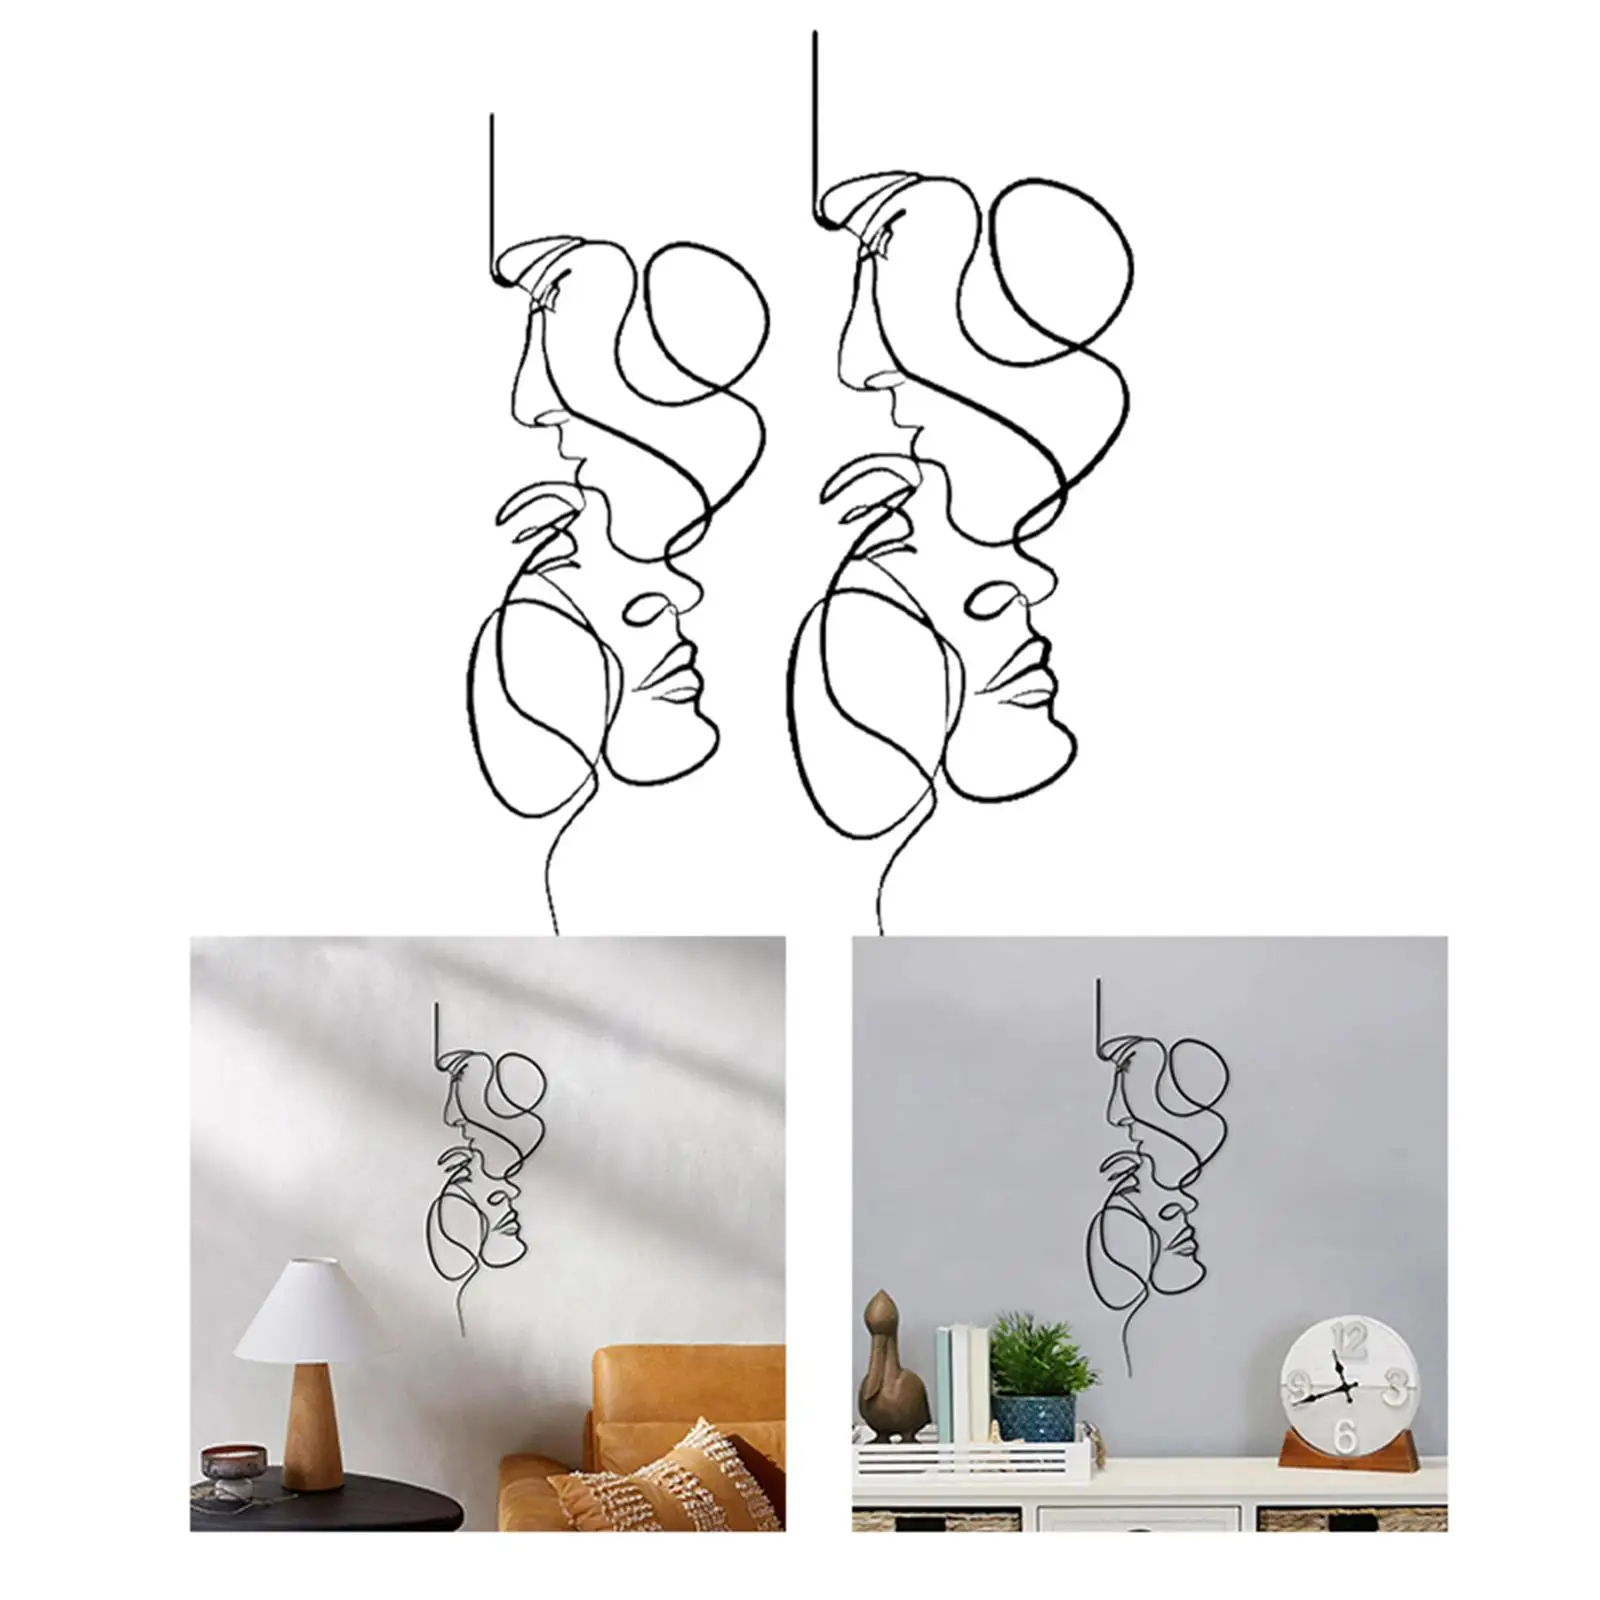 Hanging Sculptures Background Lover Decorative Home Decors Couple Metal Wall Art Decors Silhouette Statues for Bedroom Farmhouse